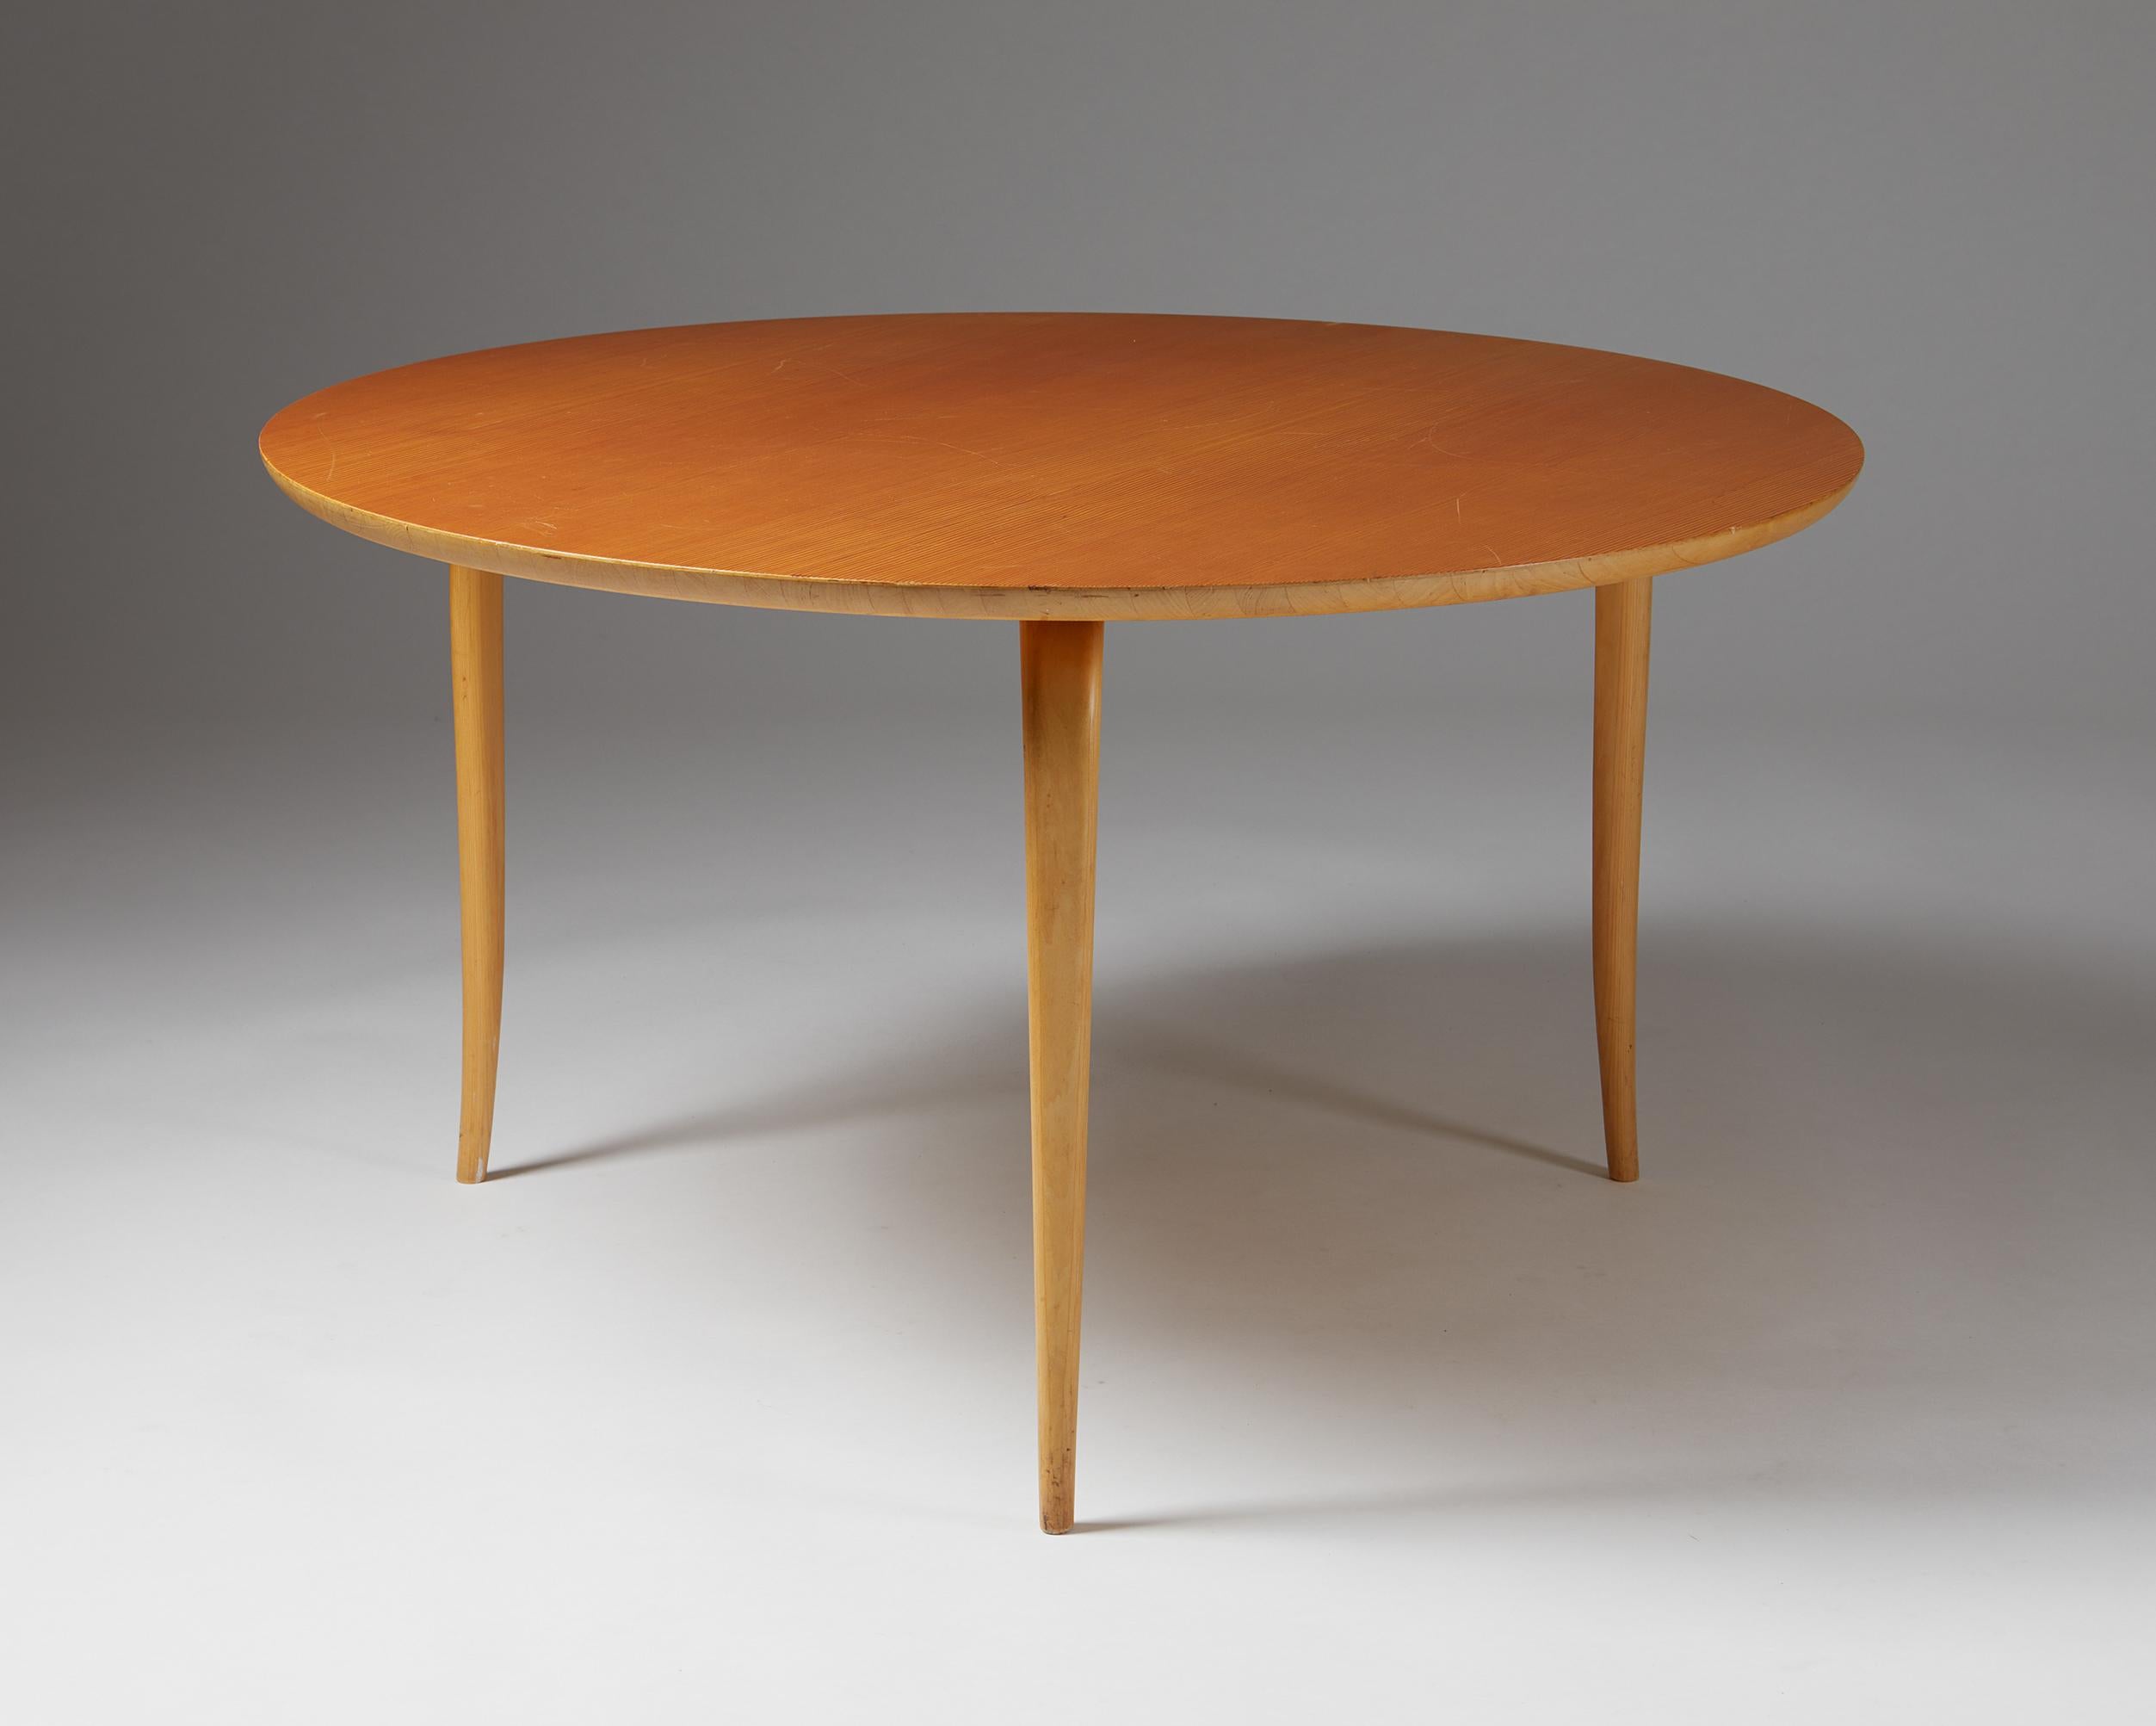 Occasional table ‘Annika’ designed by Bruno Mathsson for Karl Mathsson,
Sweden. 1967.
Birch and Oregon pine top.

Stamped.

This round “Annika” occasional table was manufactured in 1967 and designed in 1936; it is made of birch with a smooth